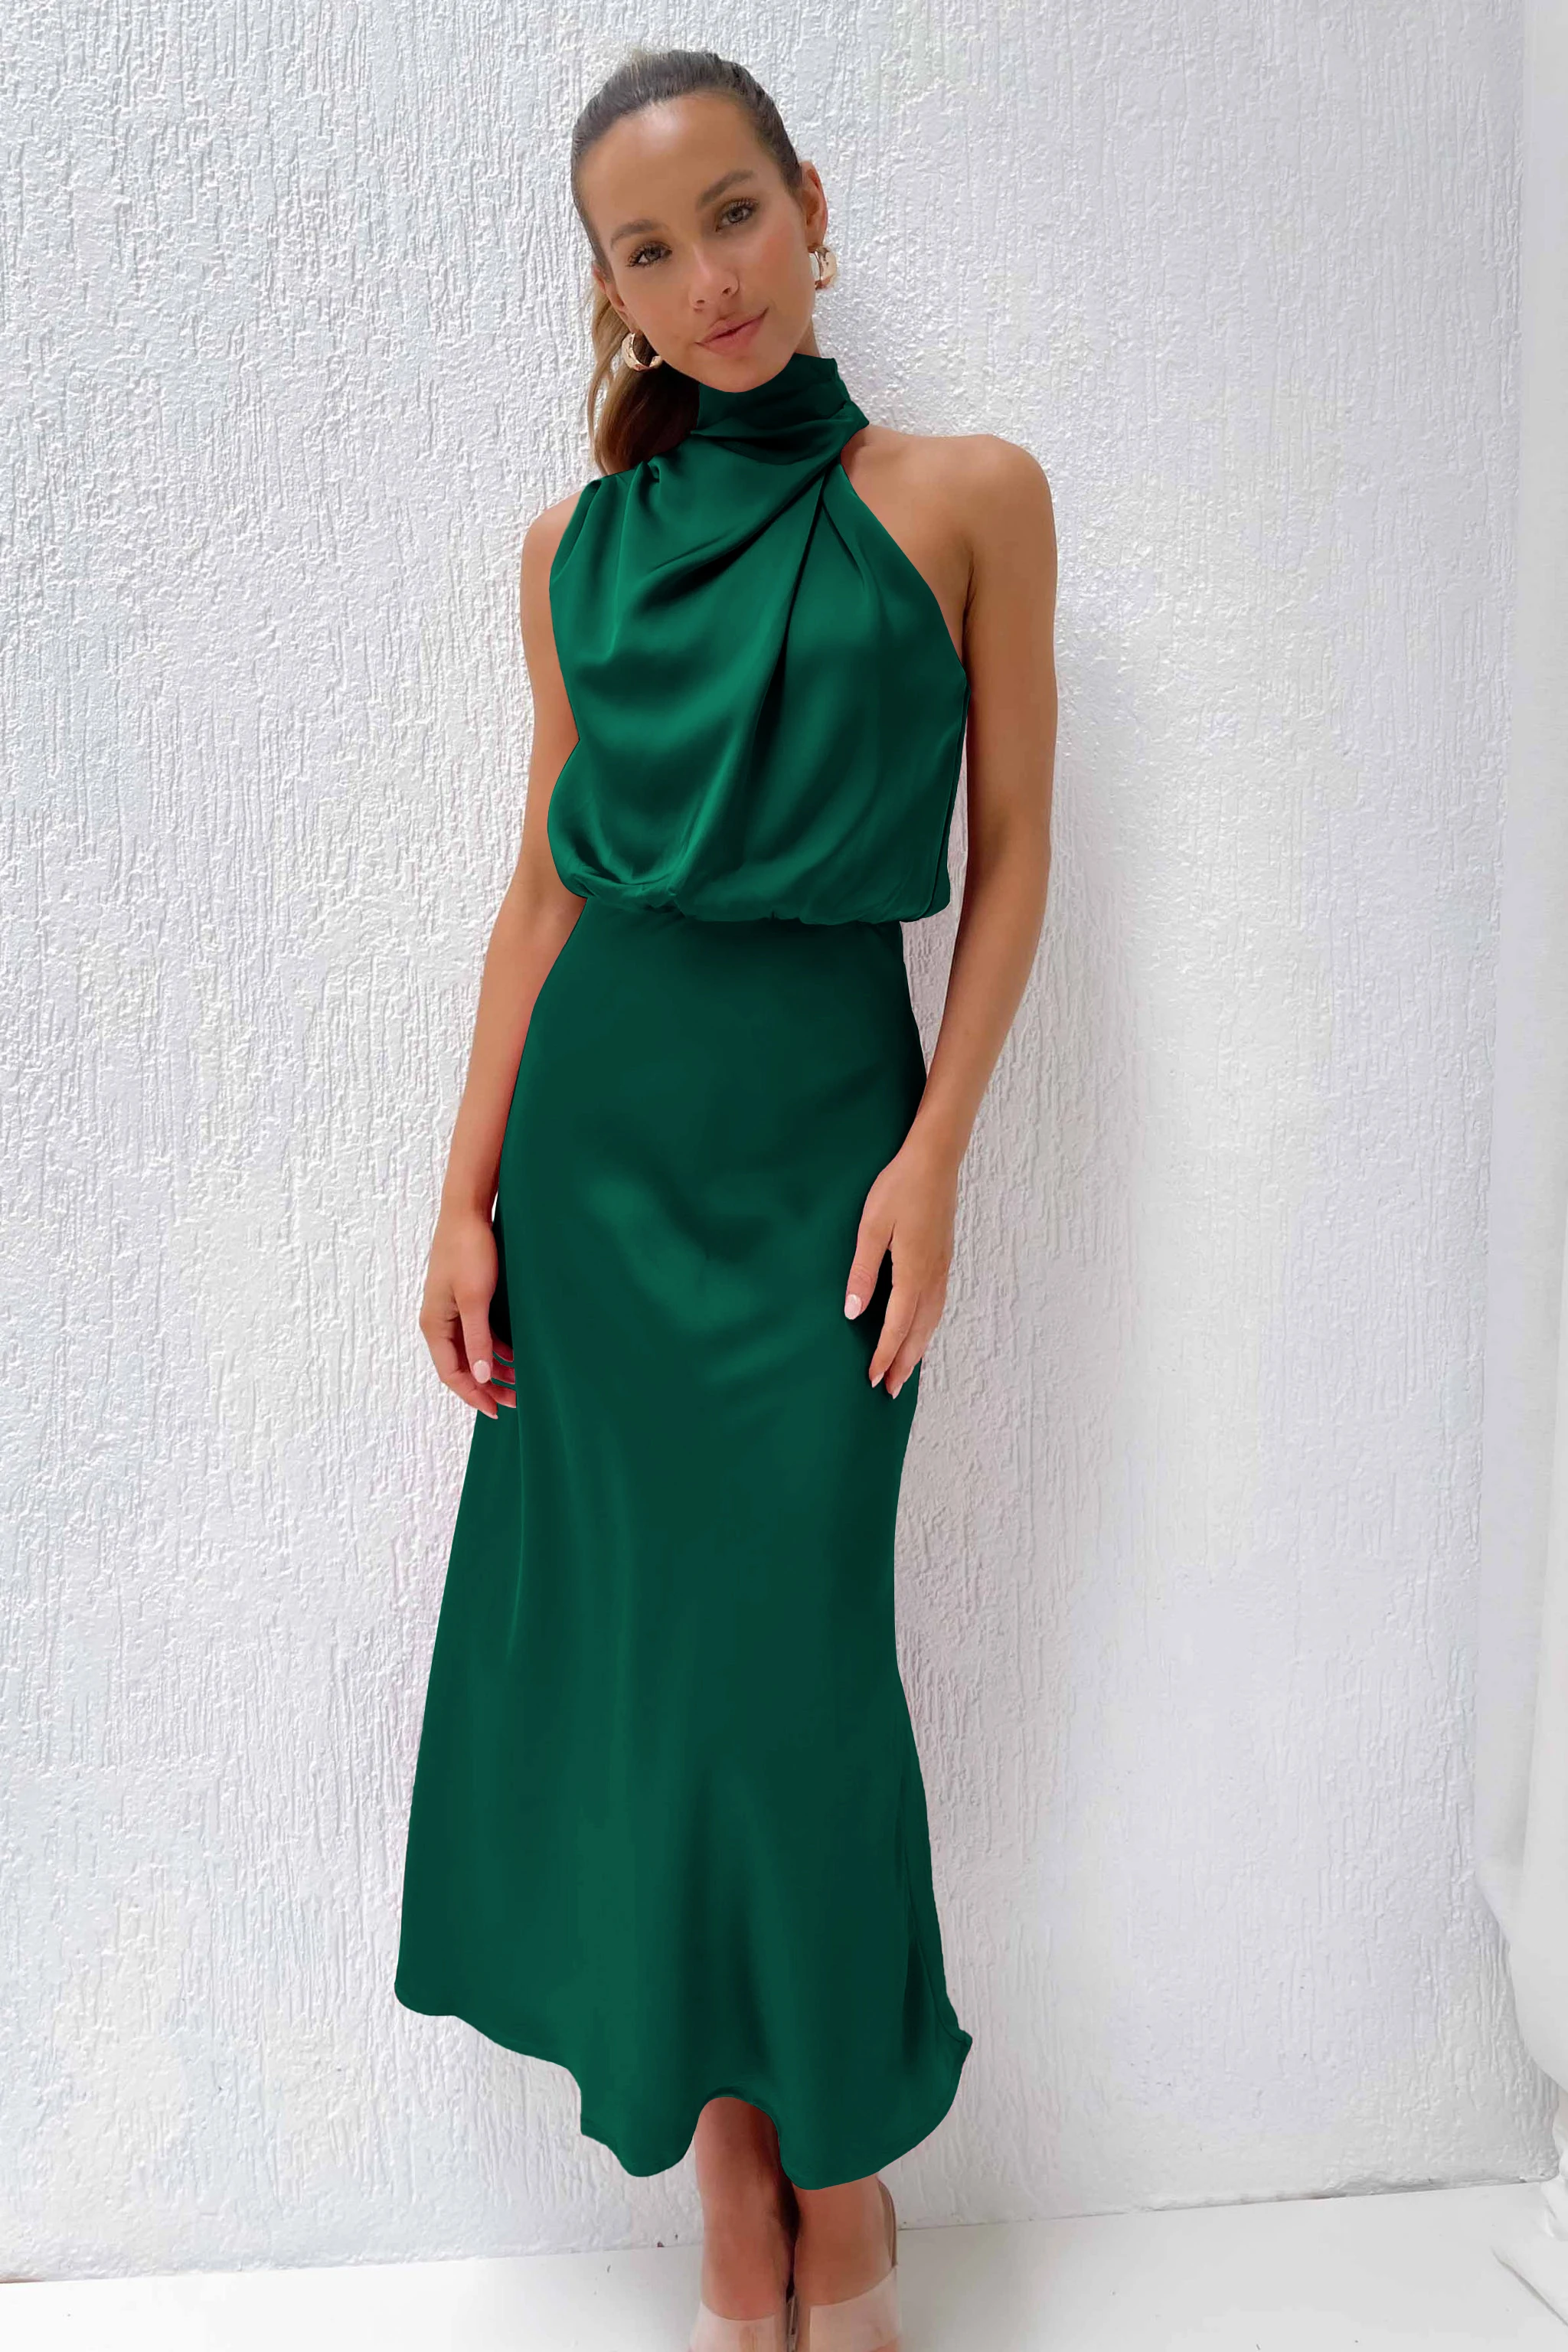 Sleeveless Mock Neck Cocktail Party Long Dresses Evening Gown Satin ...